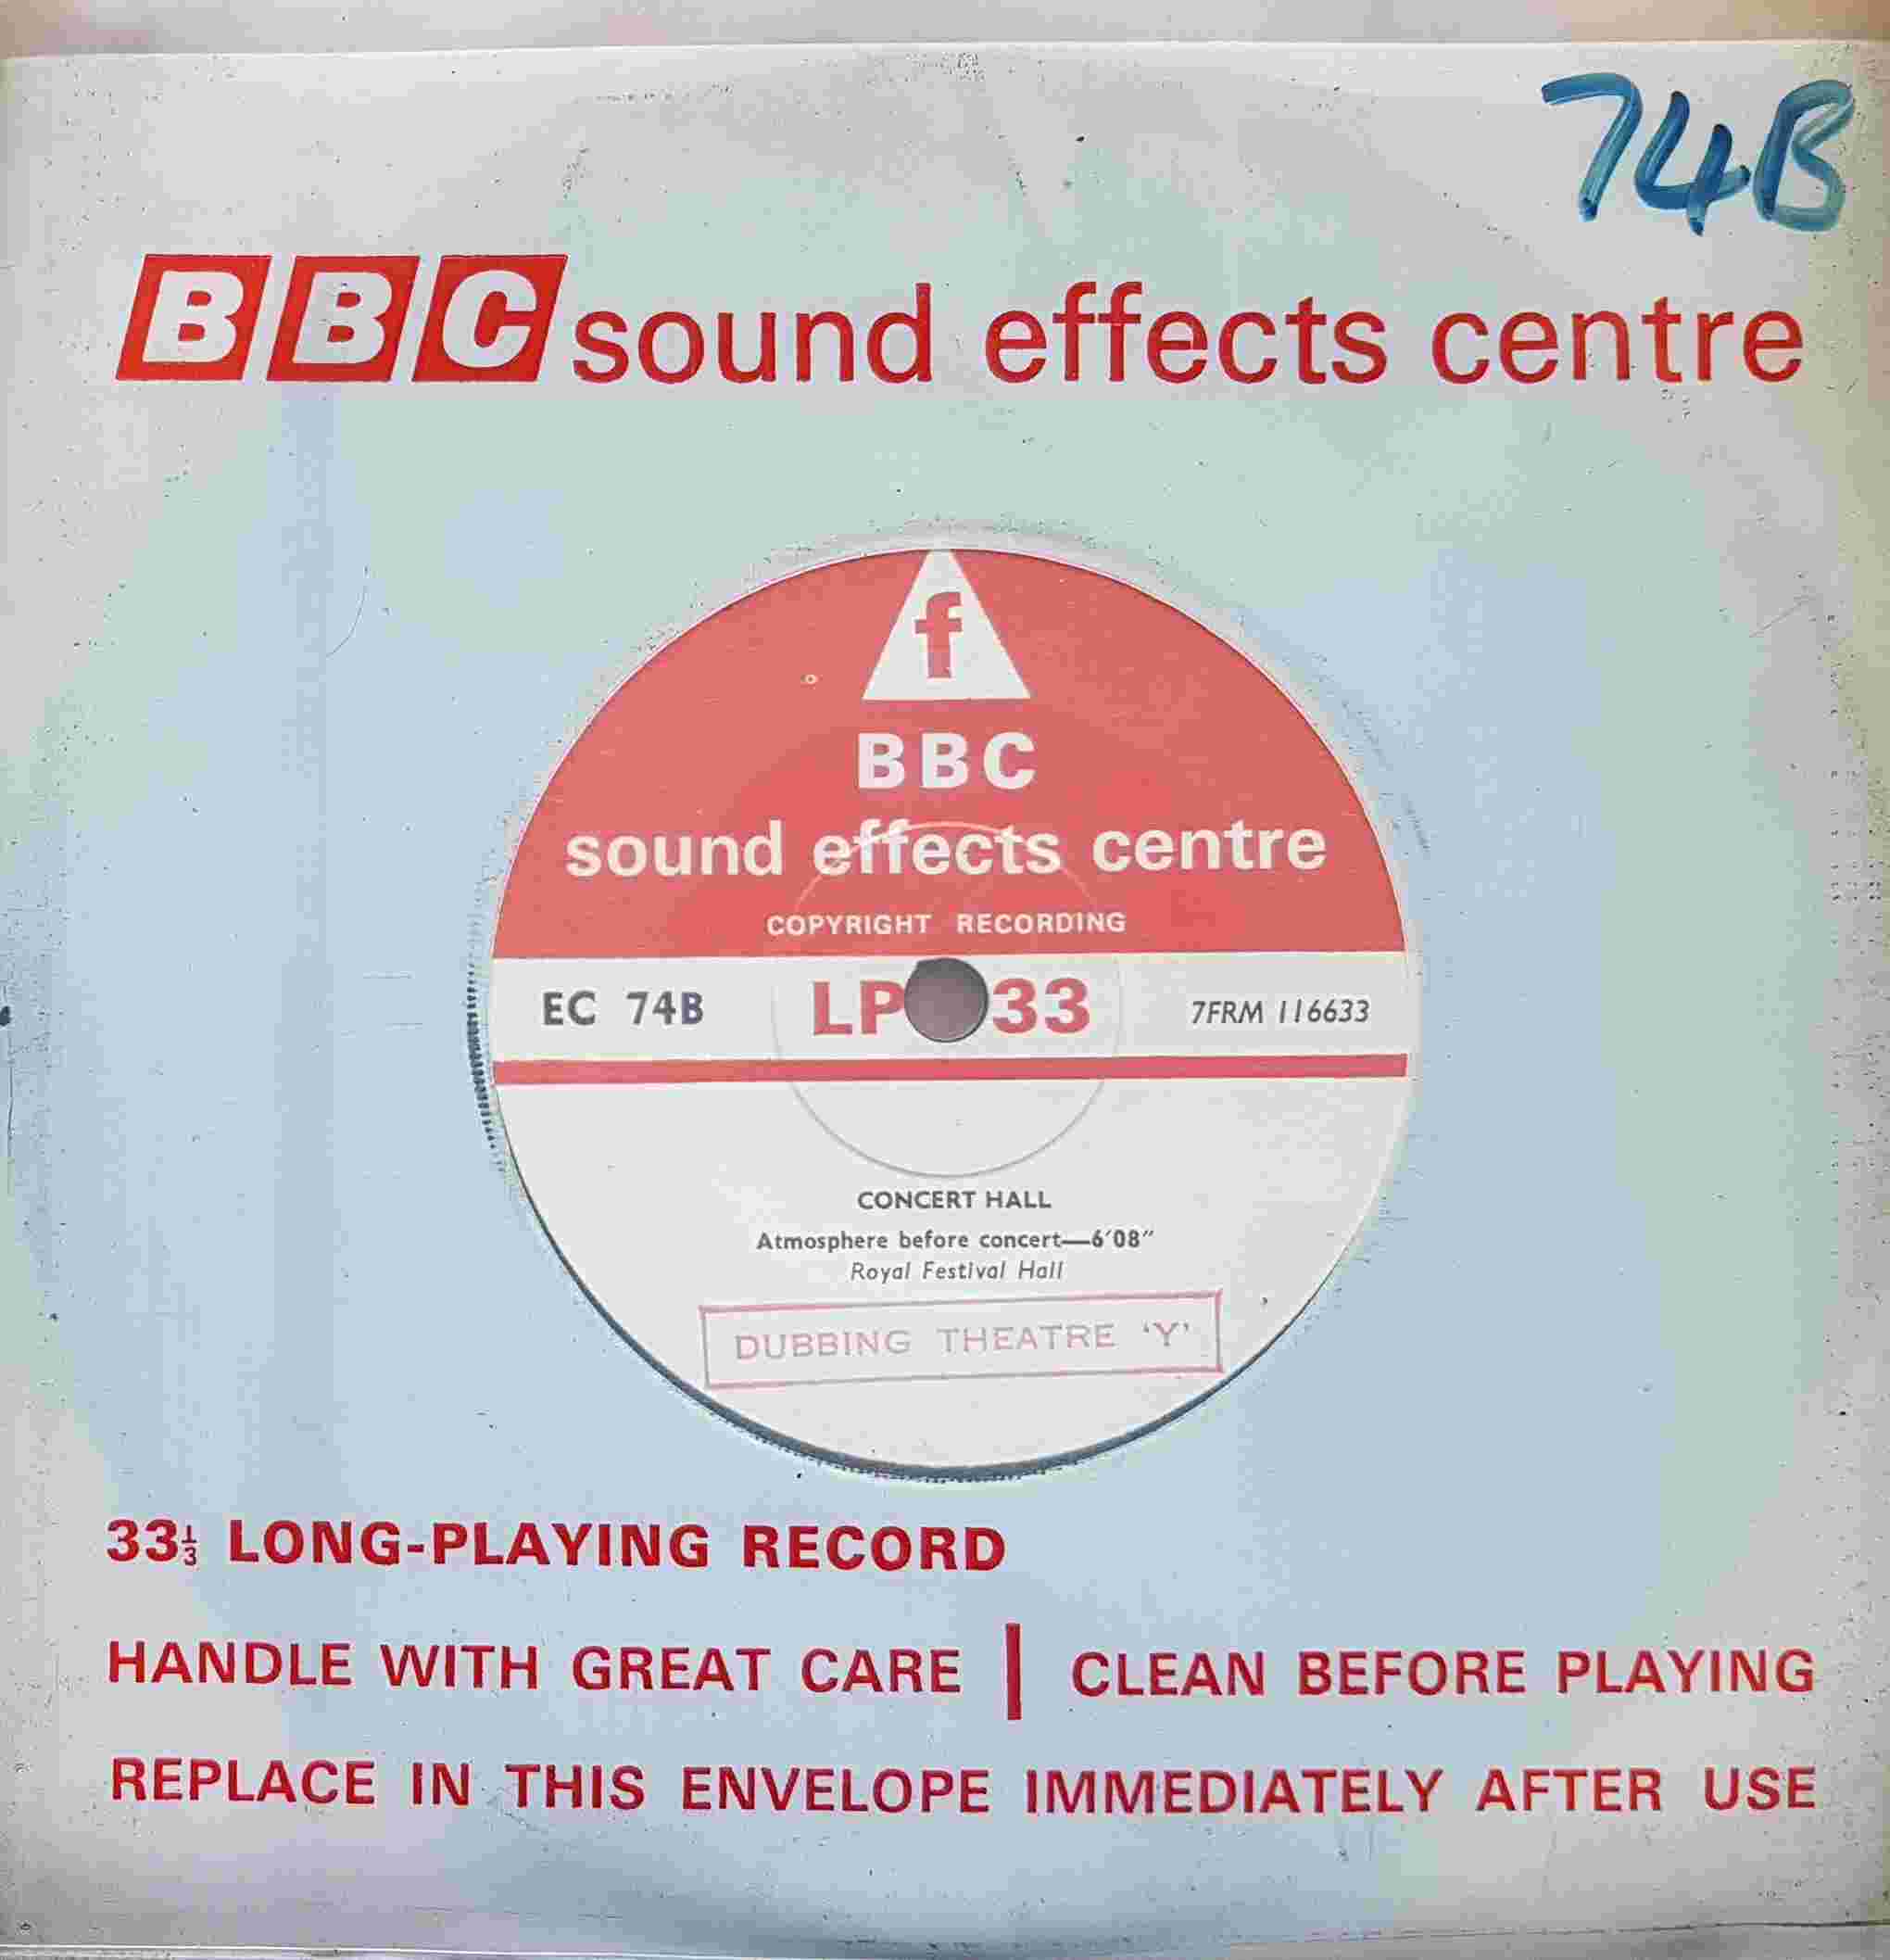 Picture of EC 74B Concert hall - Royal Festival Hall by artist Not registered from the BBC singles - Records and Tapes library